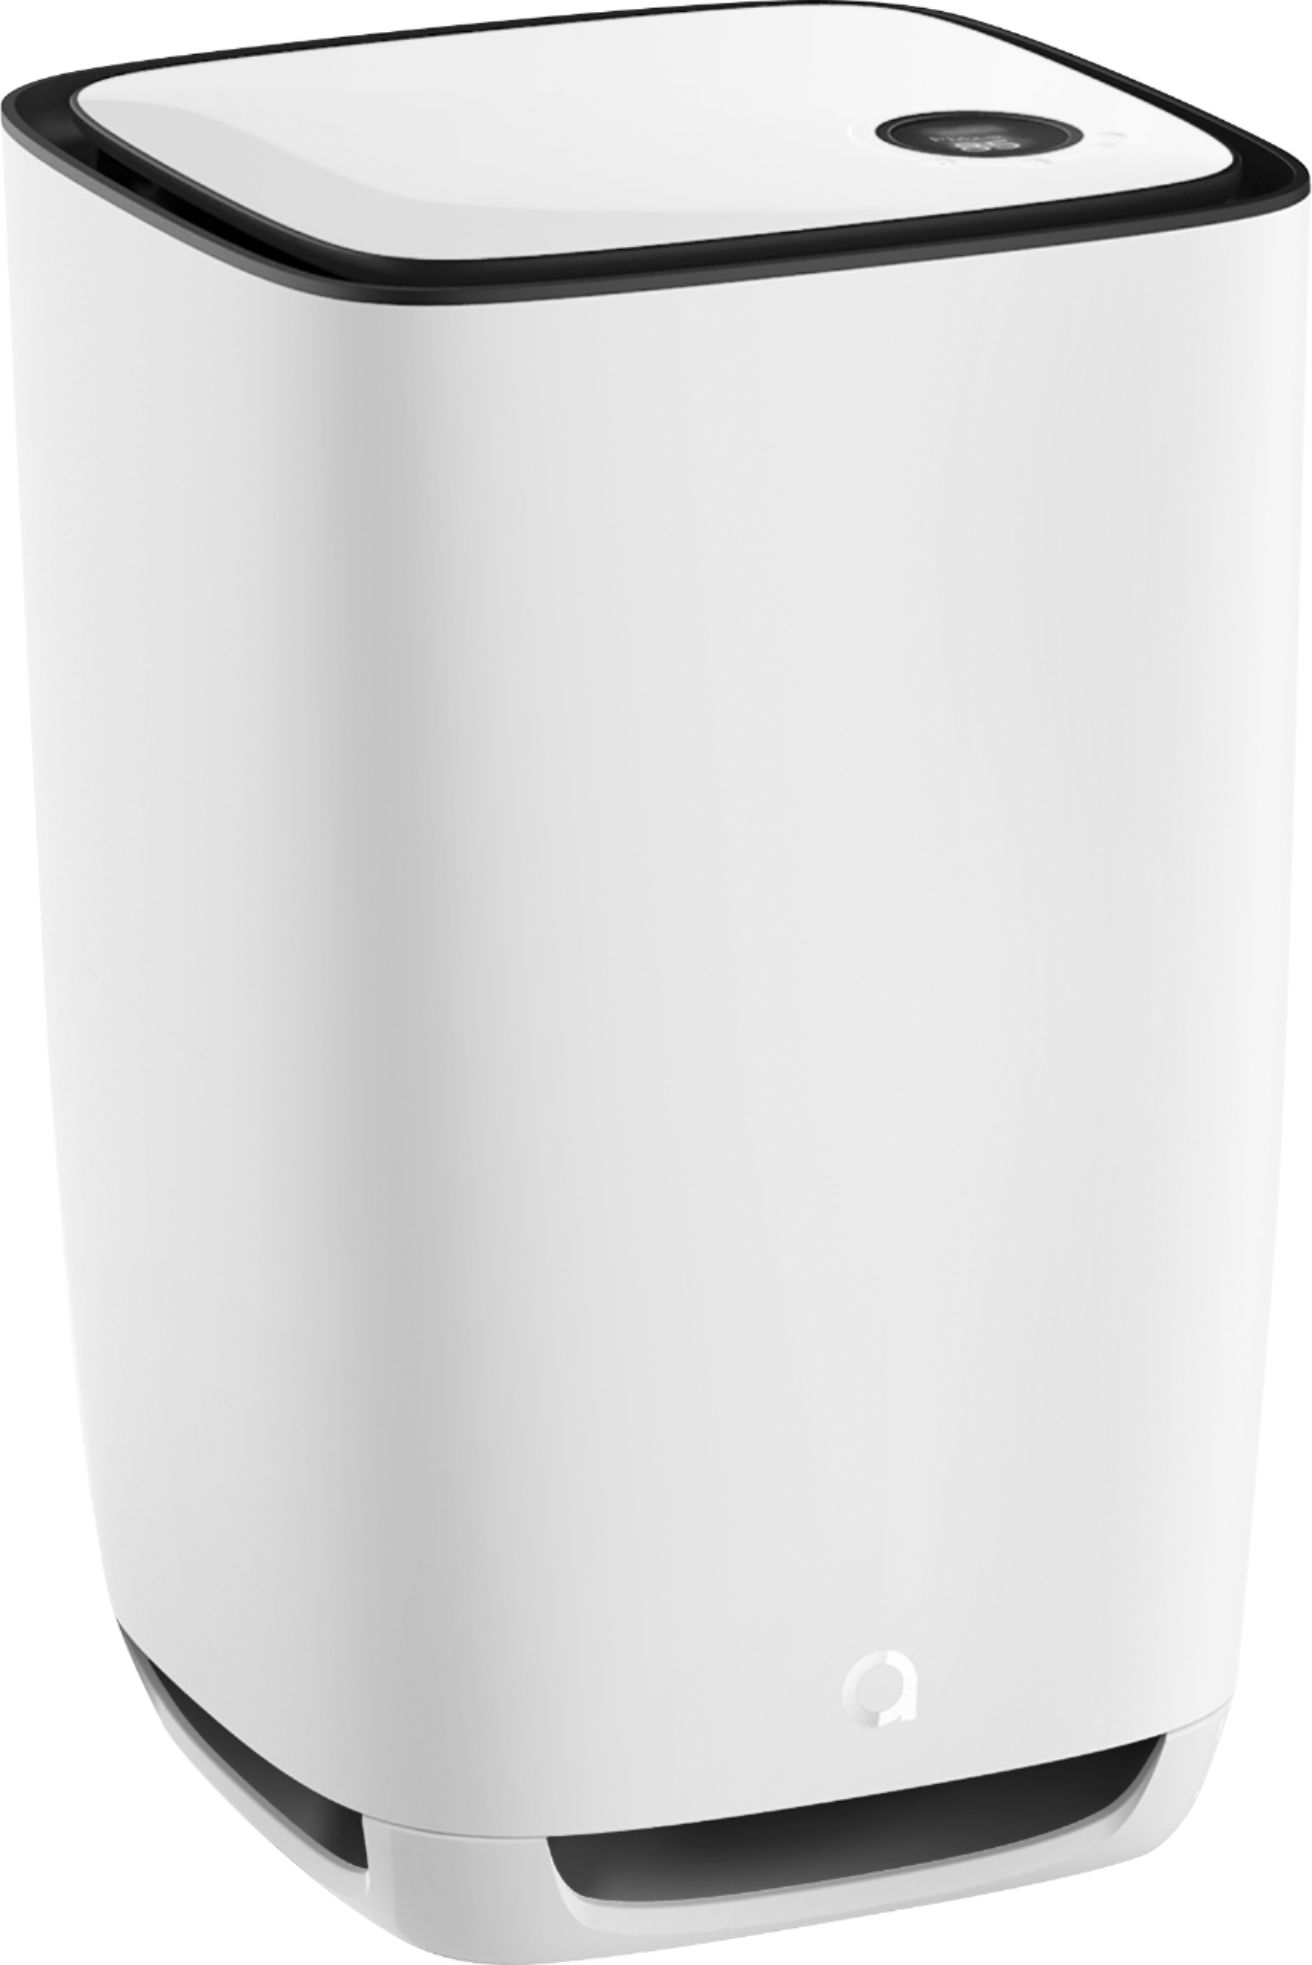 Compare Aeris Cleantec - Aair Med Pro Air Purifier - White Price in the ...